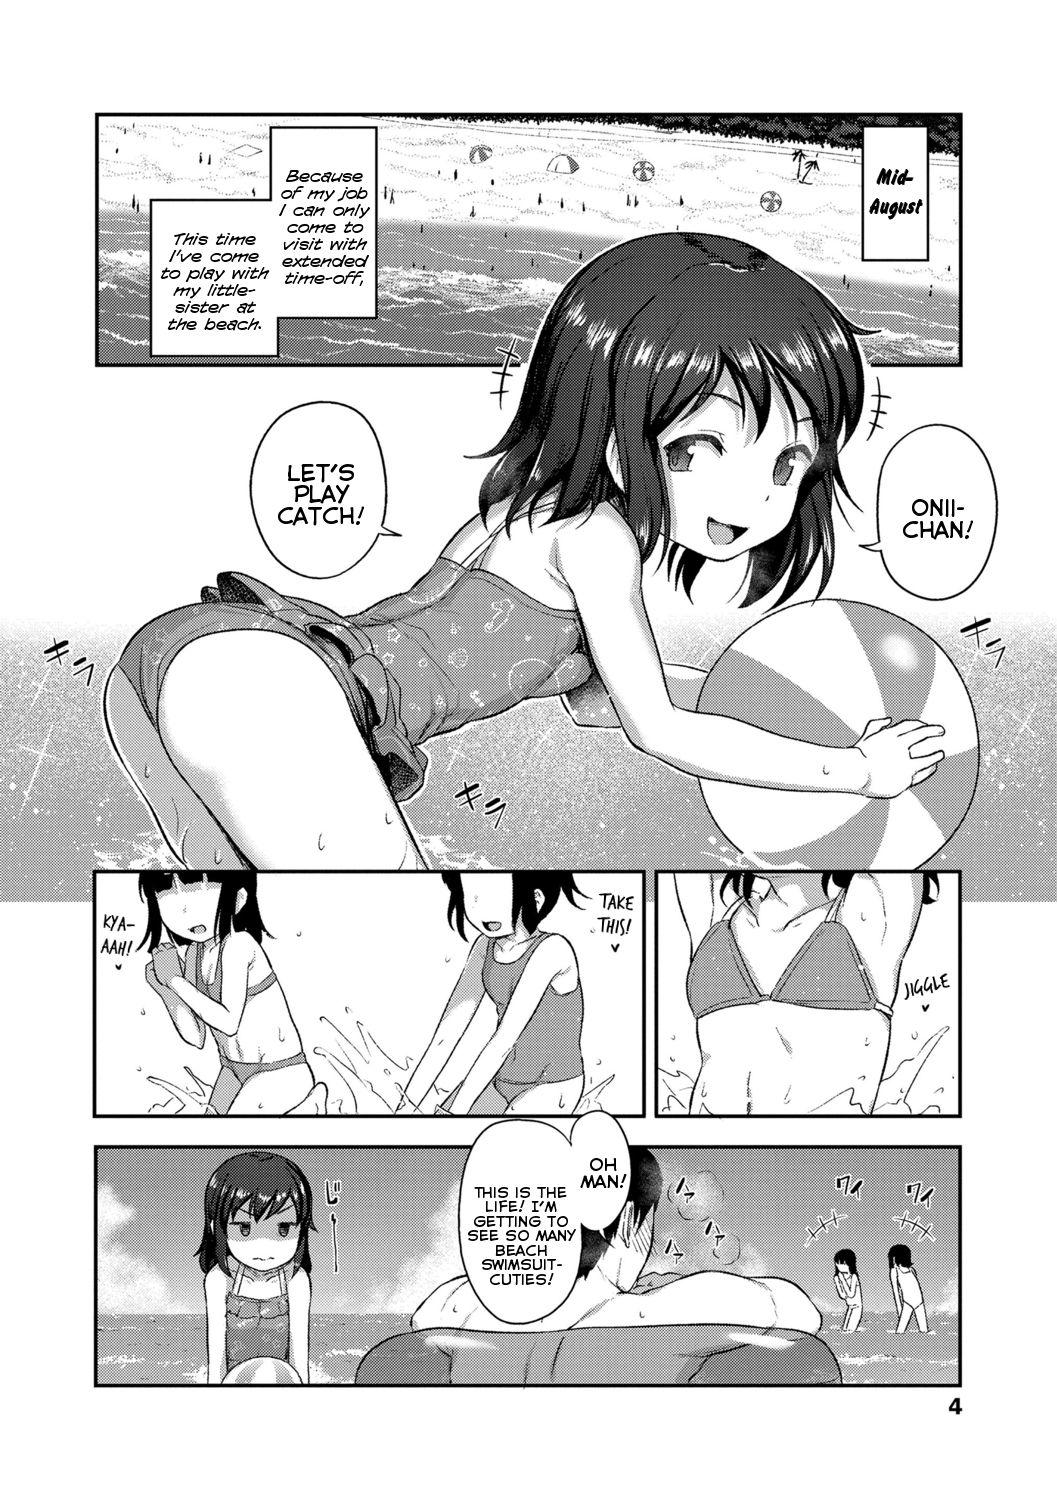 Nudity [Hayake] Imouto no Hadaka o Mite Koufun Suru nante Hen na Onii-chan | What Kind of Weirdo Onii-chan Gets Excited From Seeing His Little Sister Naked? [English] [Mistvern + Shippoyasha] [Digital] Consolo - Page 6